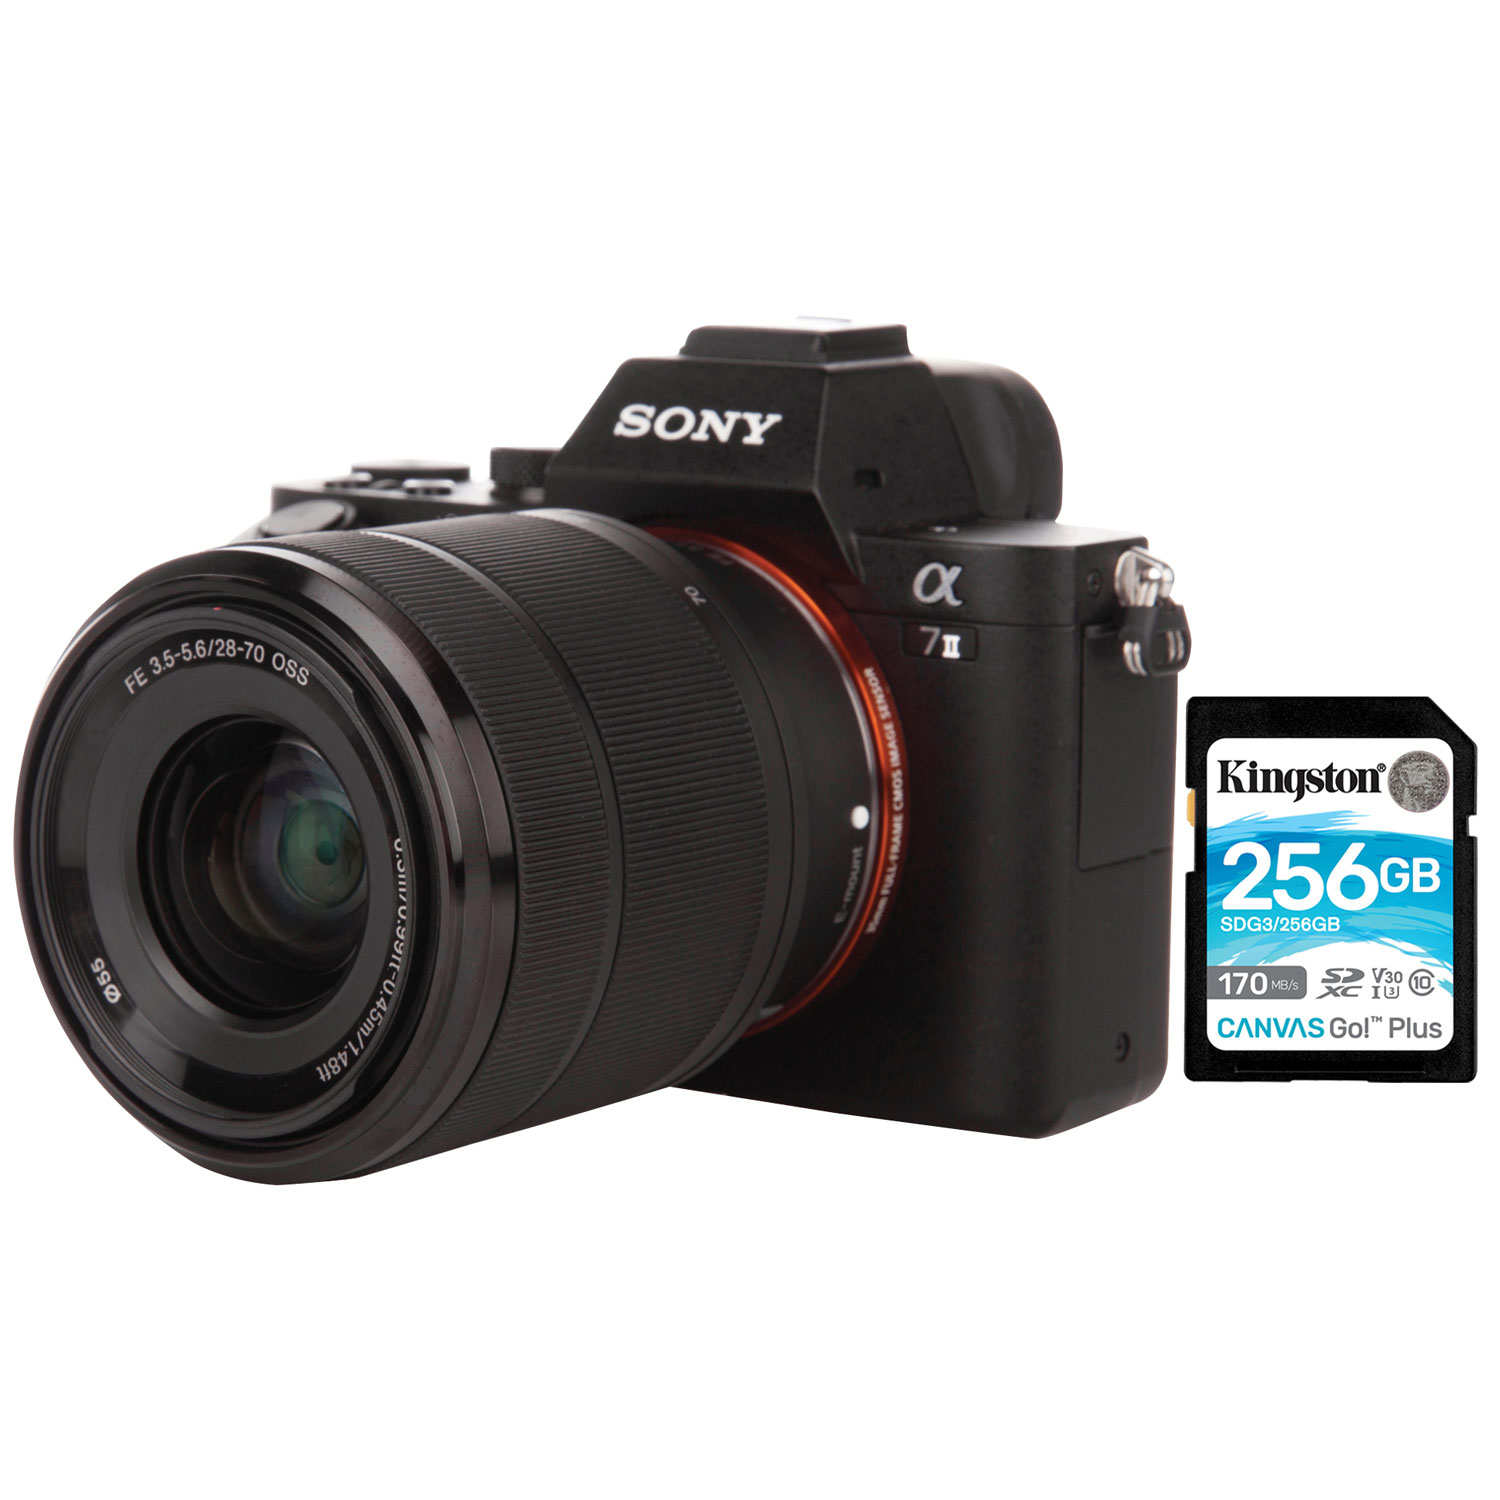 Sony Alpha a7 II Full-Frame Mirrorless Camera with FE 28-70mm Lens Kit with 256GB Memory Card